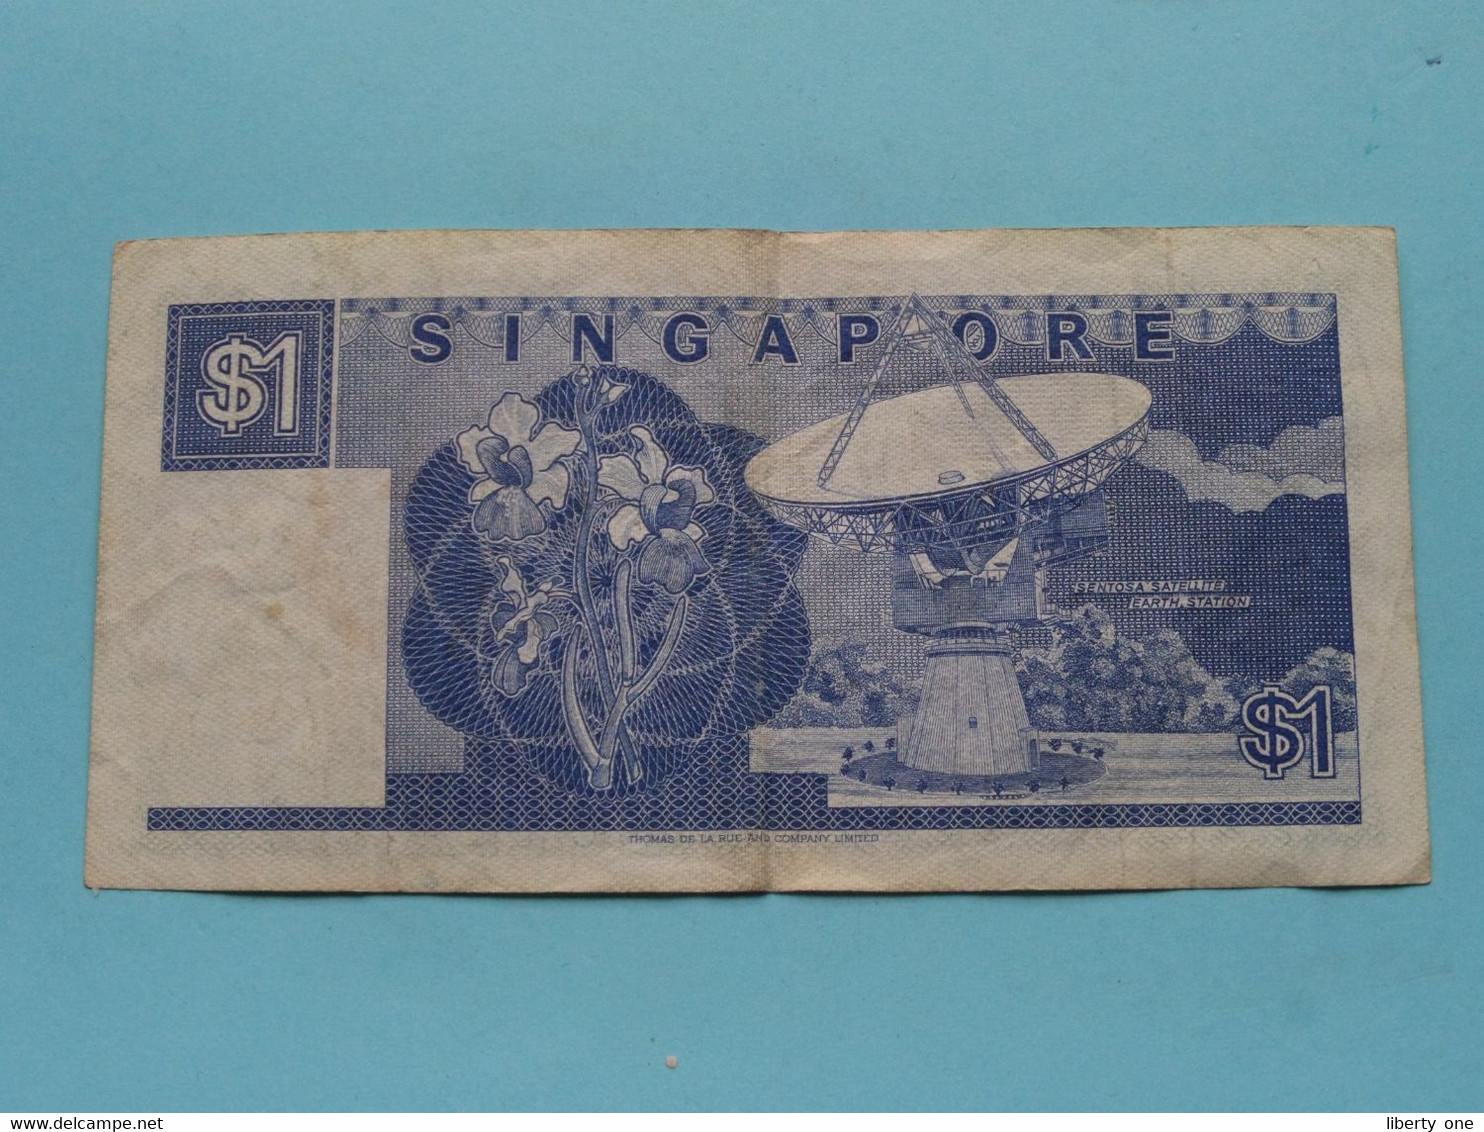 1 $ > Singapore One Dollar - A32 255136 ( For Grade, Please See Photo ) Used ! - Singapore